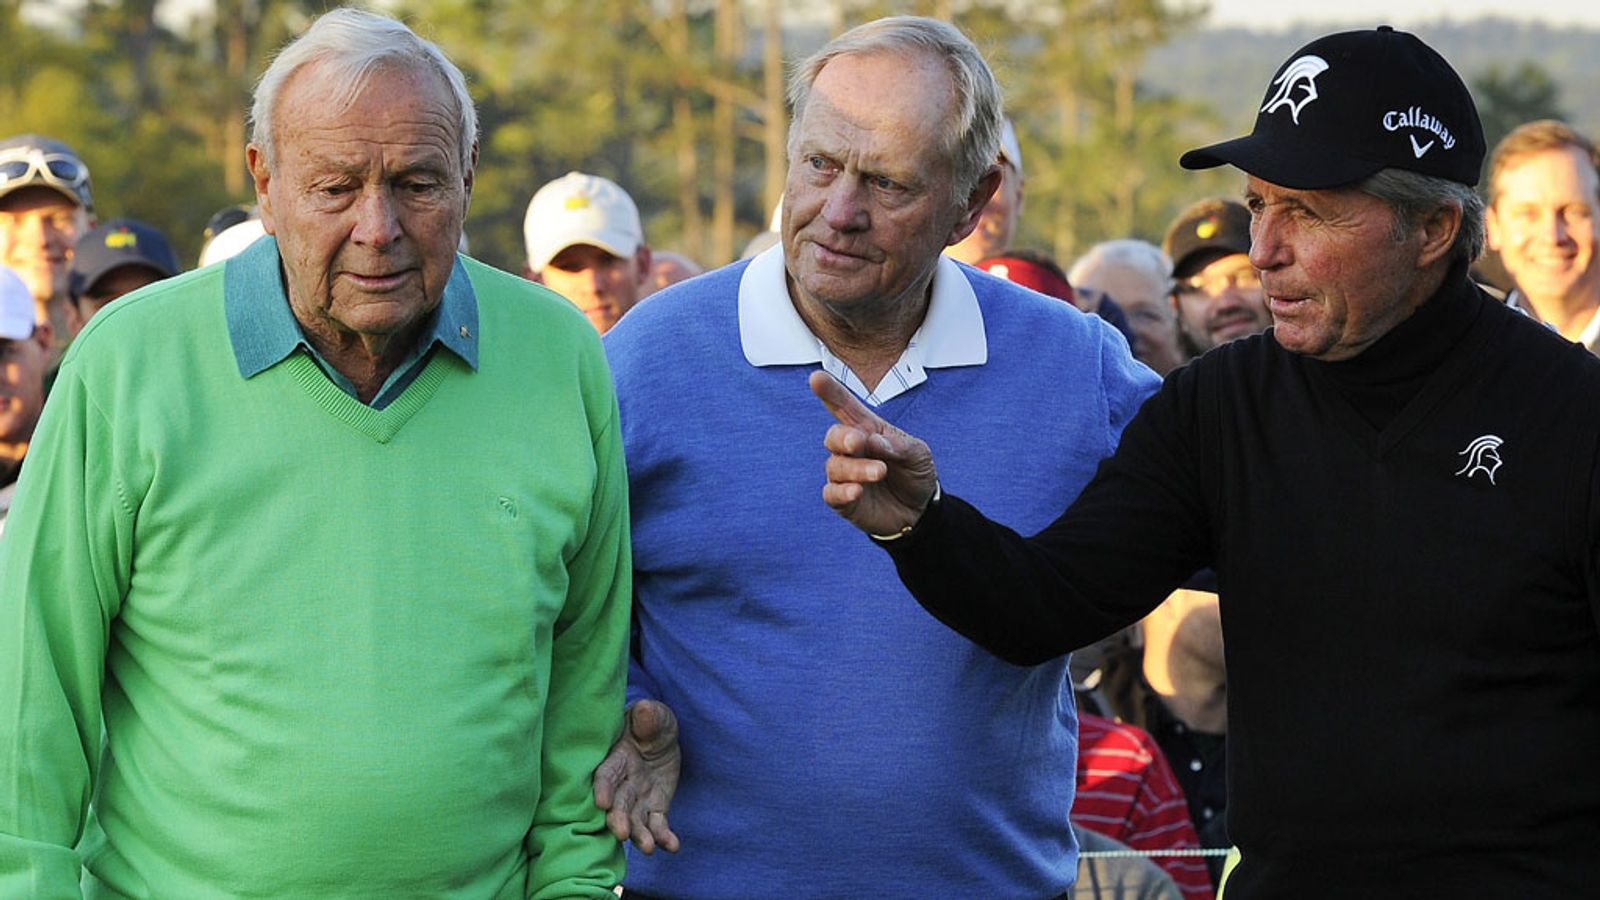 Golf's original 'Big Three' remain thrilled at being honorary starters ...